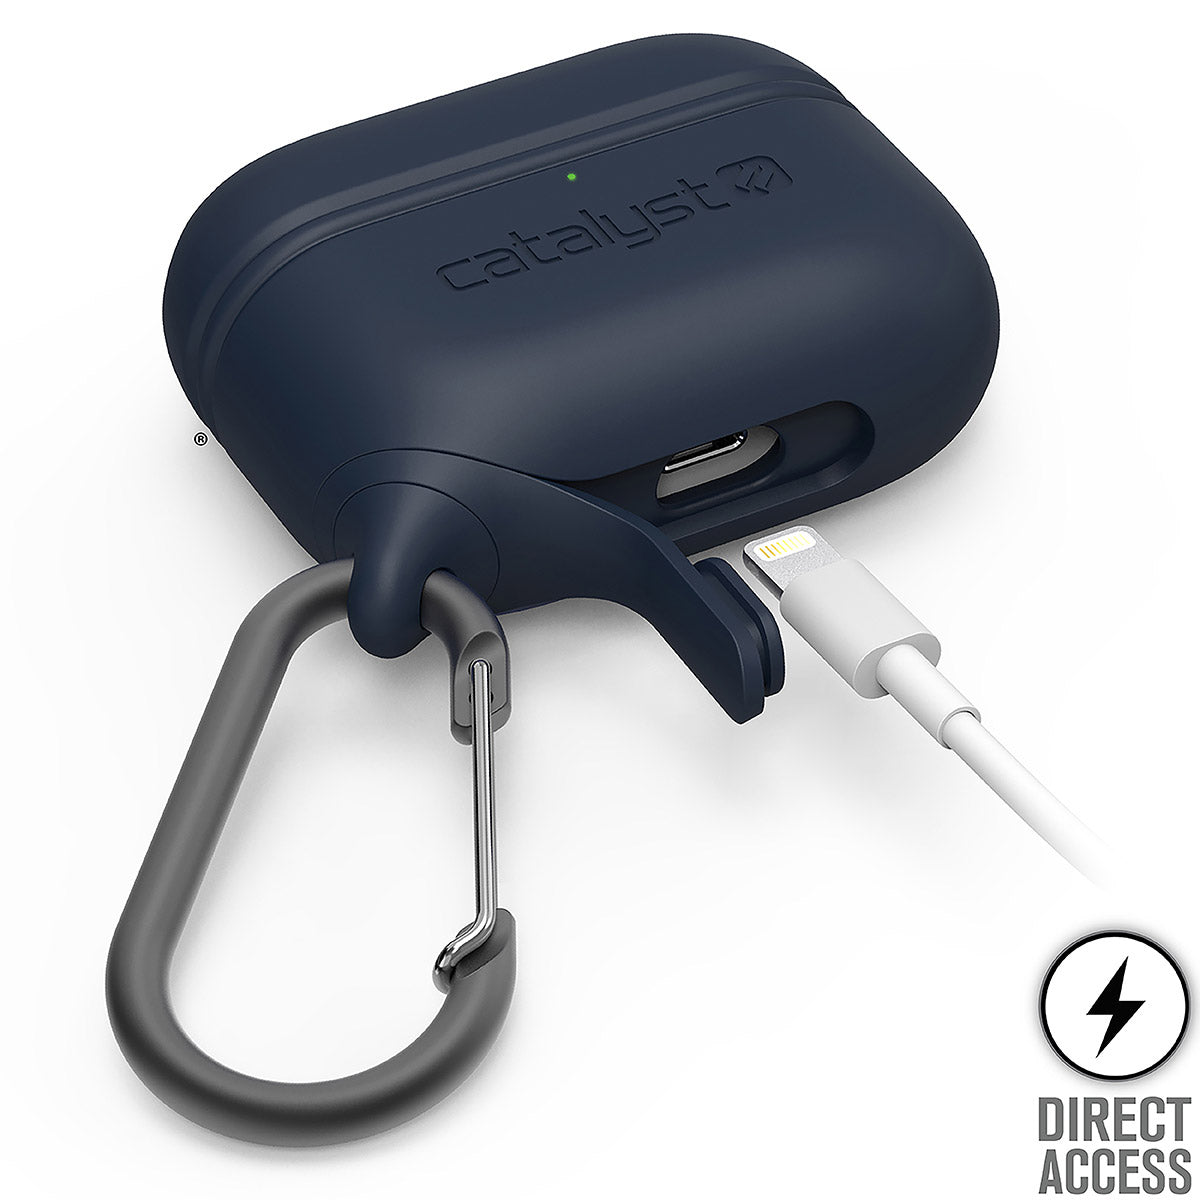 CATAPLAPDPRONAV | catalyst airpods pro gen 2 1 waterproof case carabiner special edition blue open charging plug with lightning cable text reads direct access